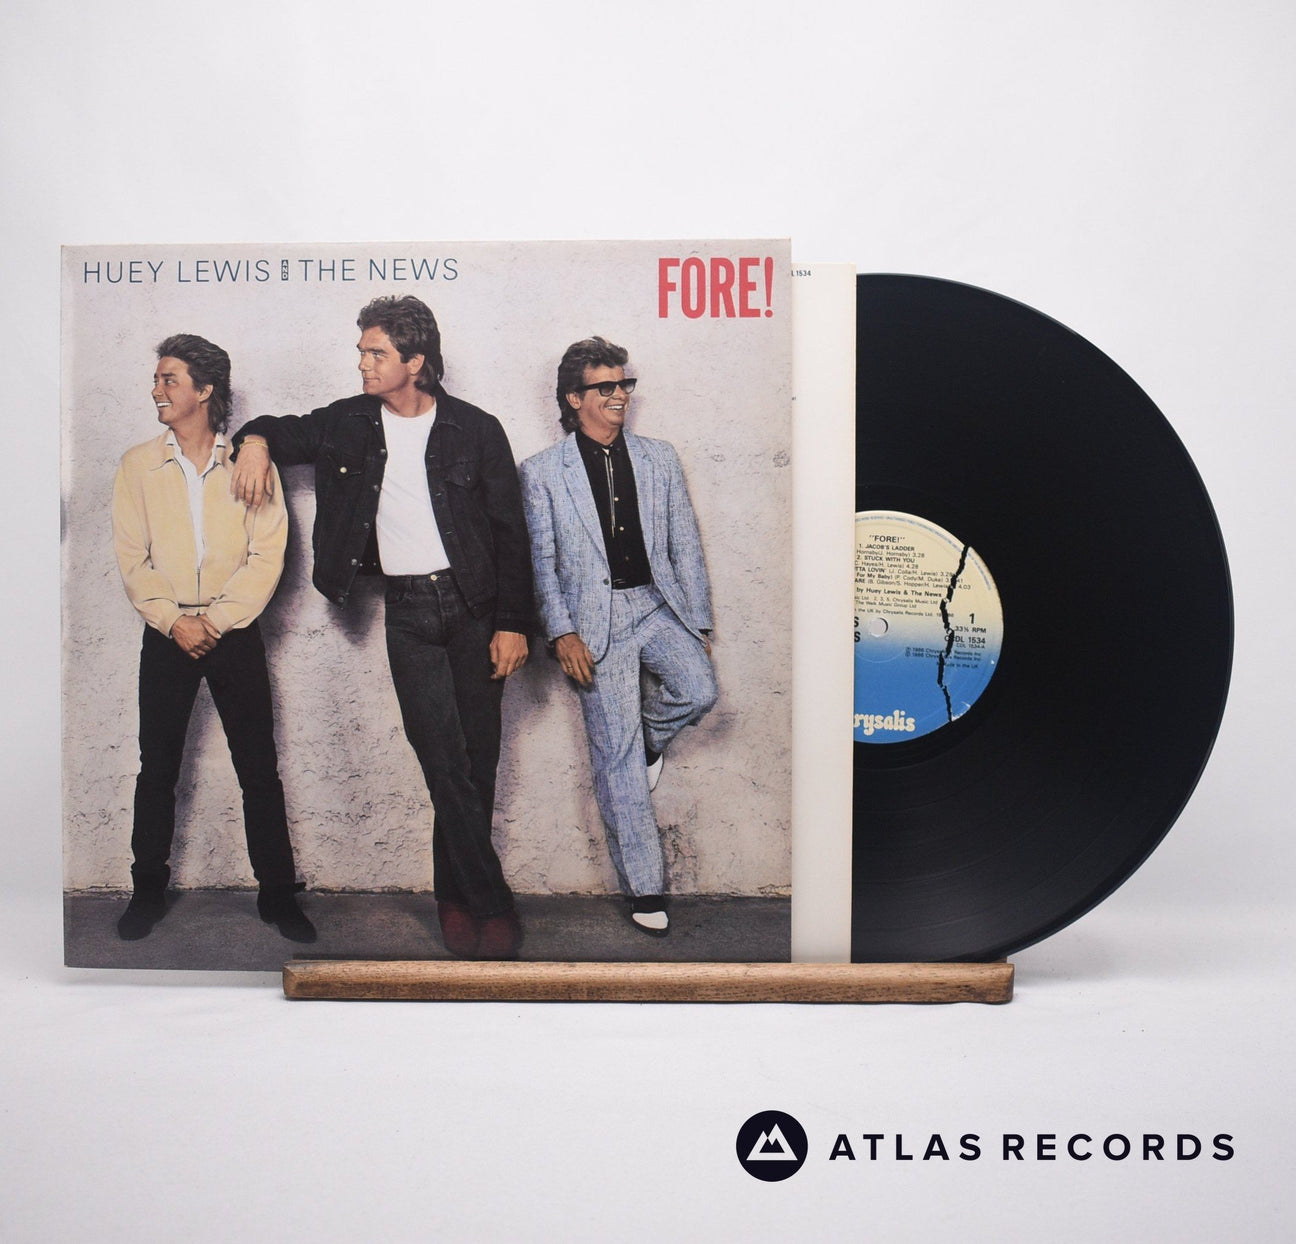 Huey Lewis & The News Fore! LP Vinyl Record - Front Cover & Record